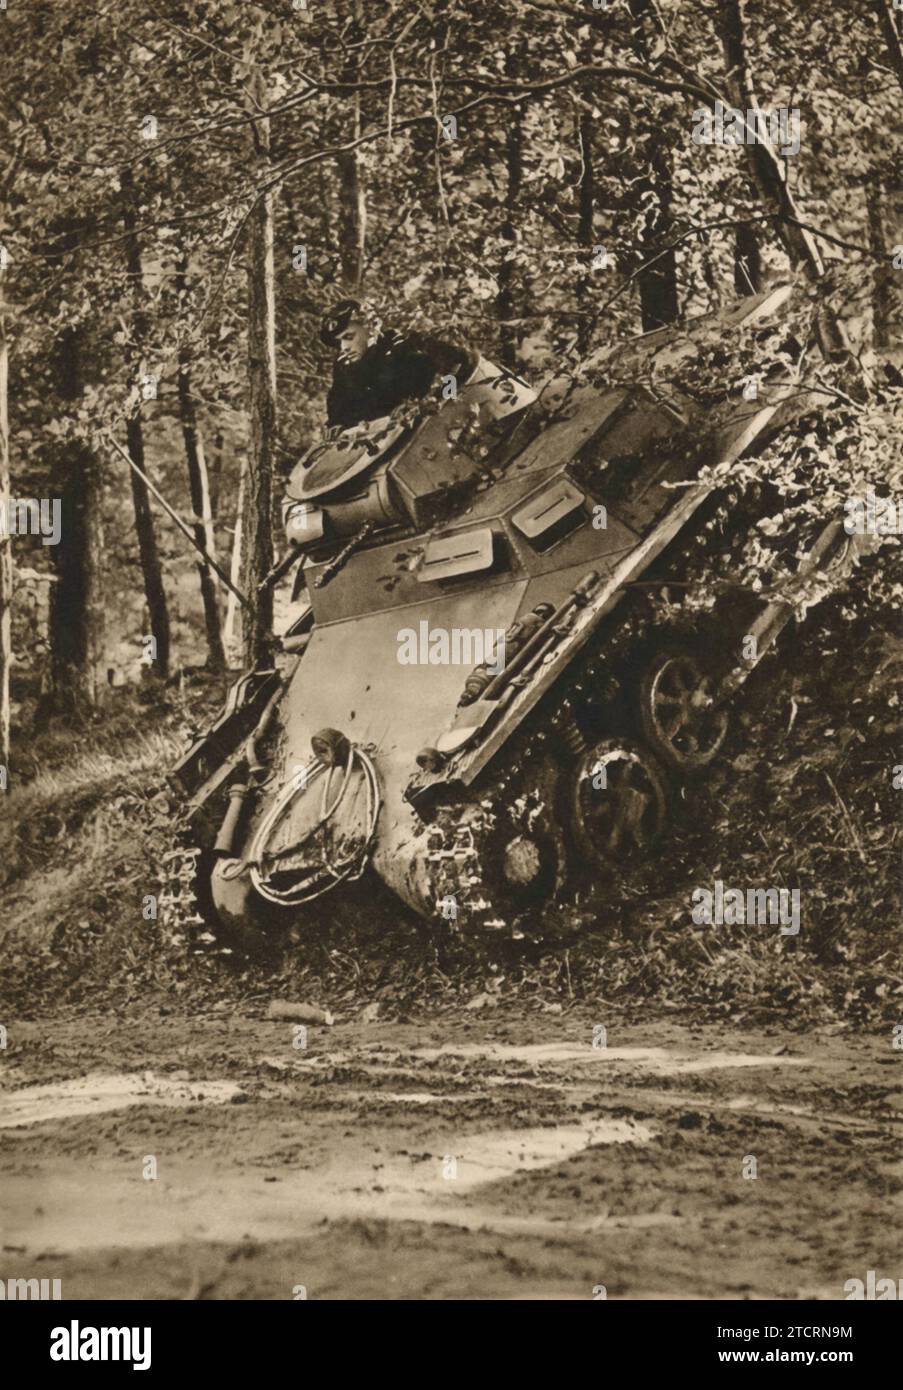 German armored vehicles, concealed within the forest, prepare to launch an attack. This tactic of using natural cover for stealth highlights the strategic use of terrain in enhancing the element of surprise in military engagements. The maneuver reflects a blend of cautious positioning and offensive readiness Stock Photo